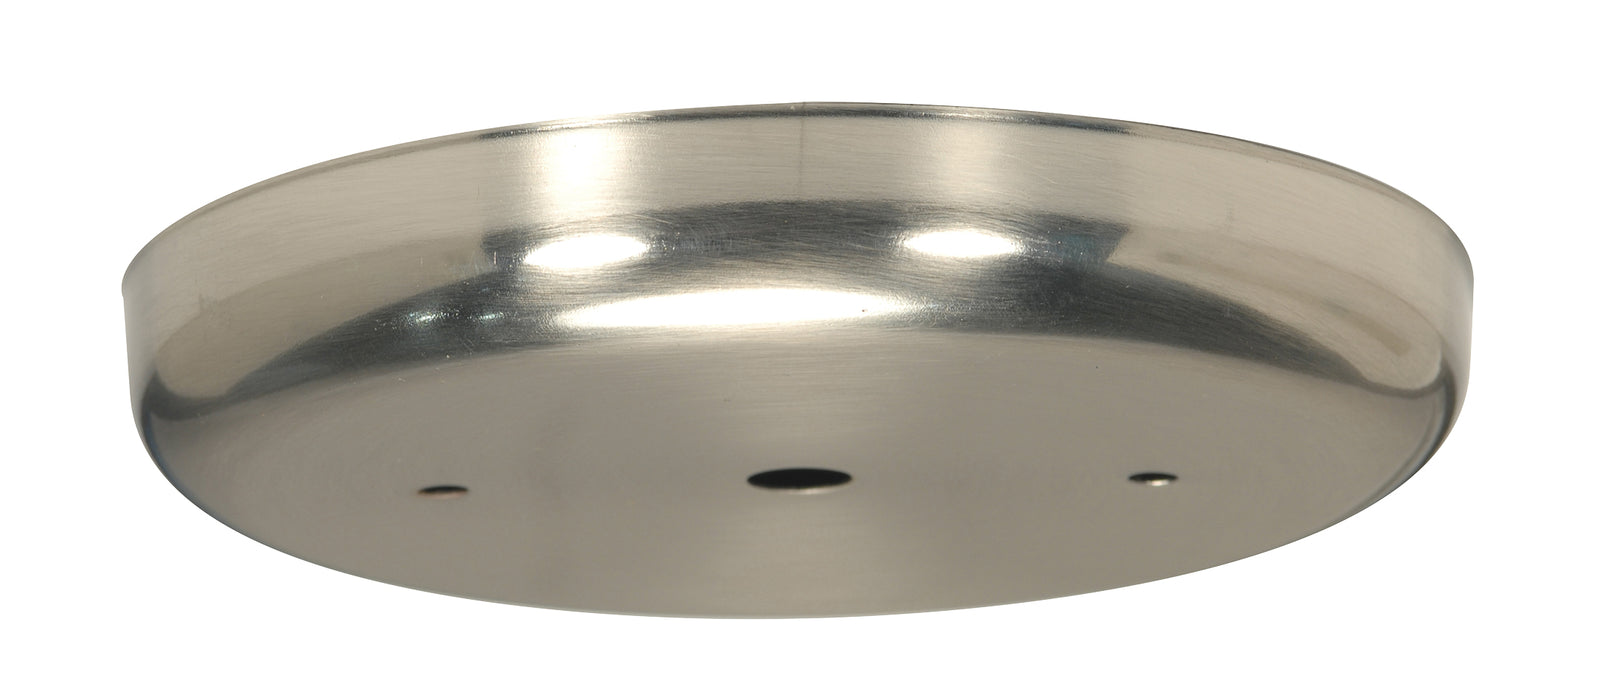 SATCO/NUVO Contemporary Canopy Only Brushed Nickel Finish 5-1/4 Inch Diameter 7/16 Inch Center Hole 2-8/32 Bar Holes (90-1902)